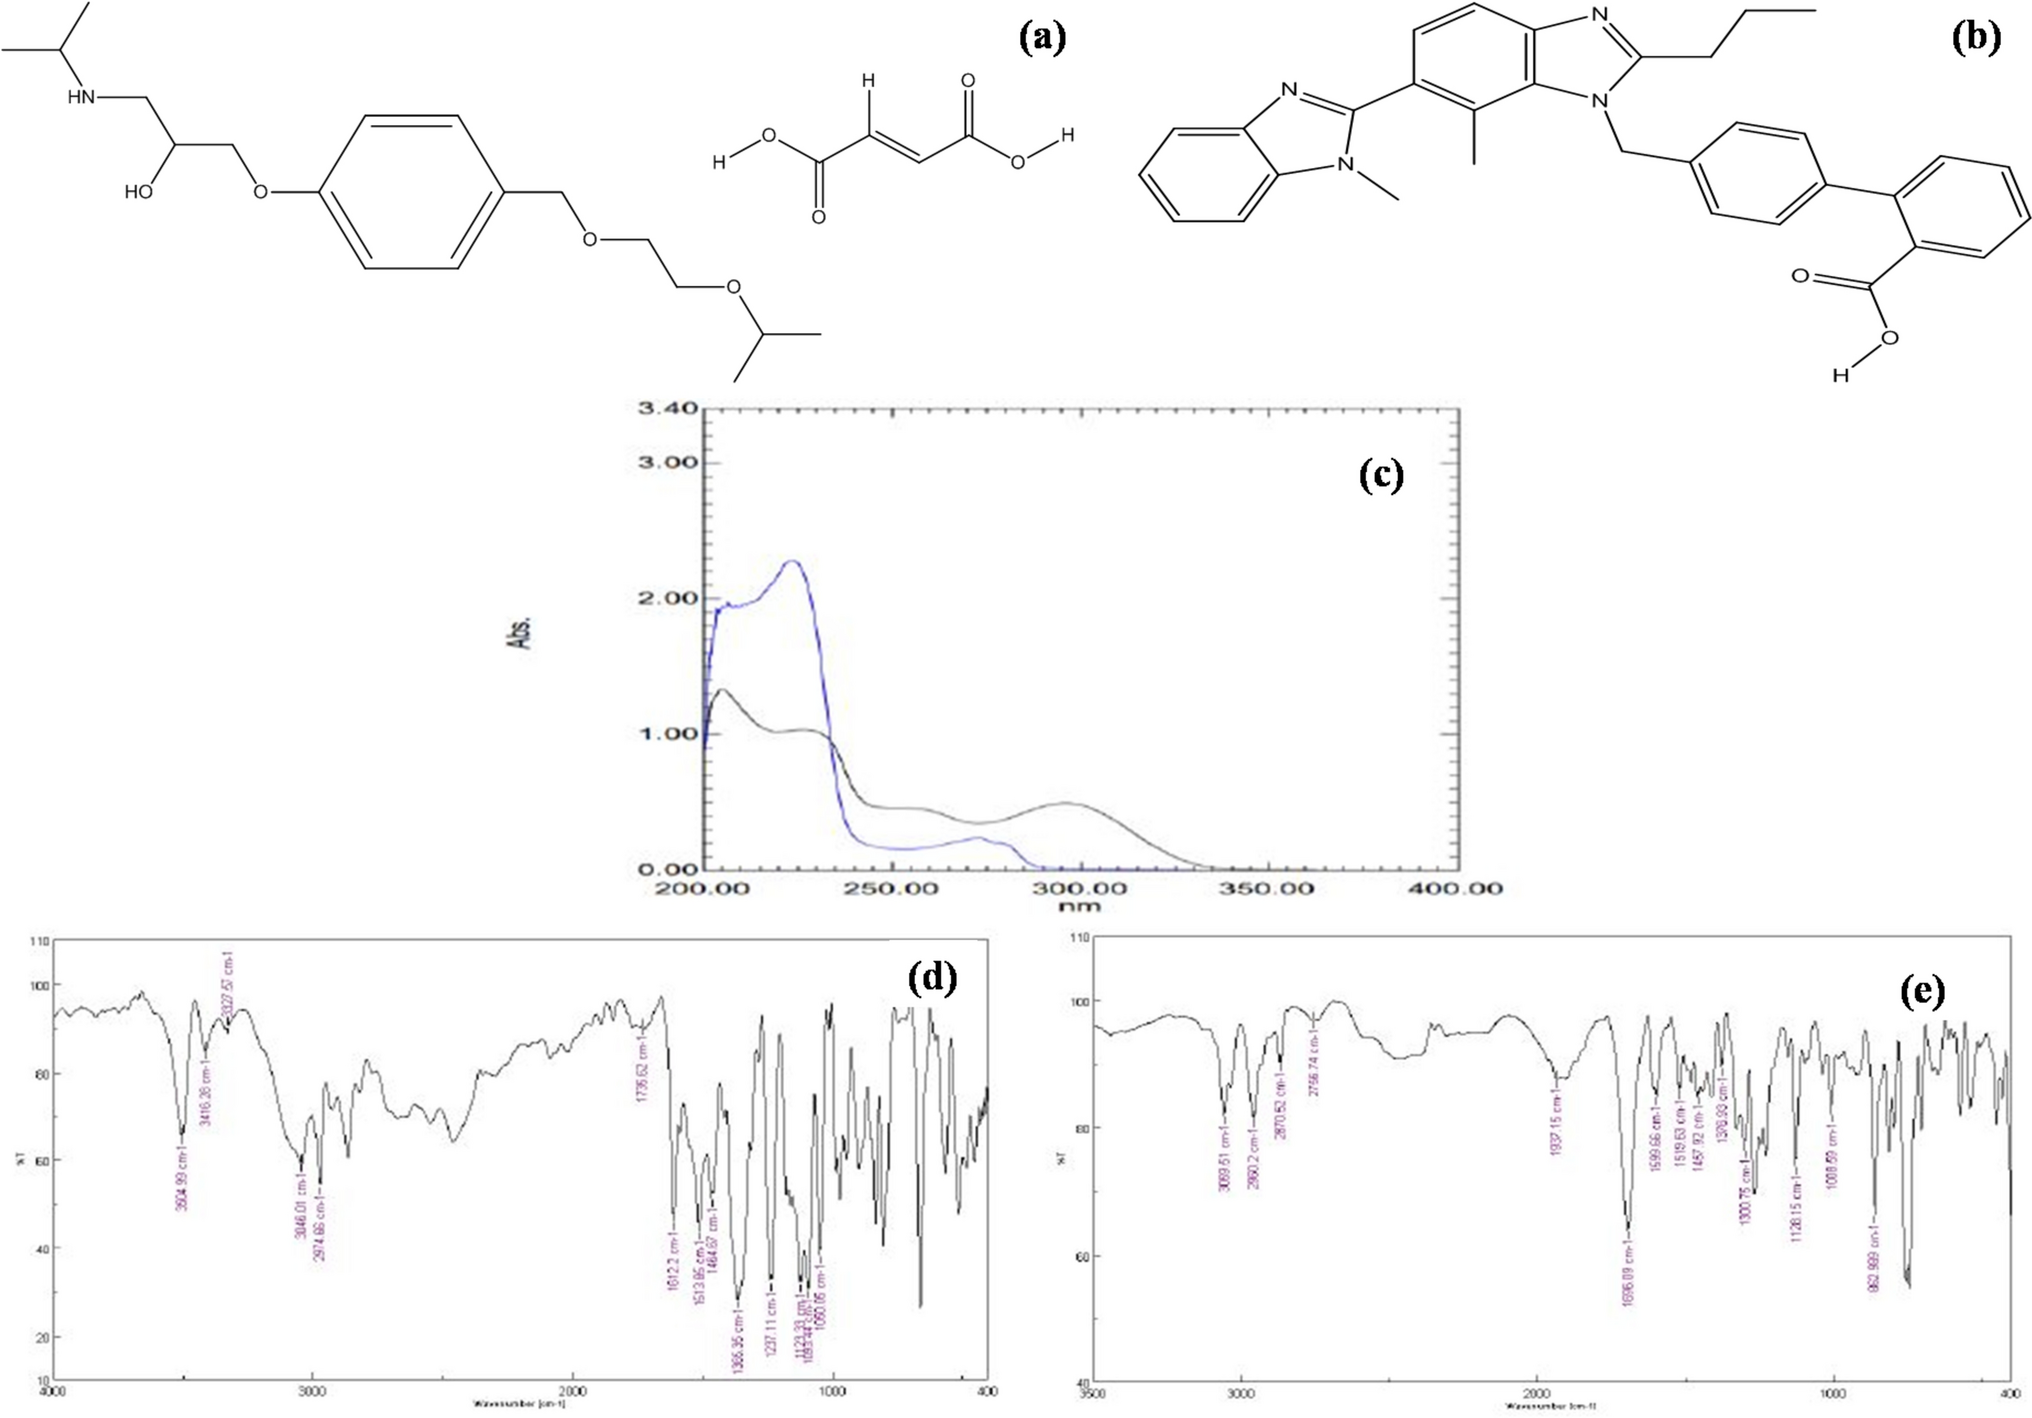 High-performance thin-layer chromatography-based methodology for simultaneous estimation of bisoprolol fumarate and telmisartan